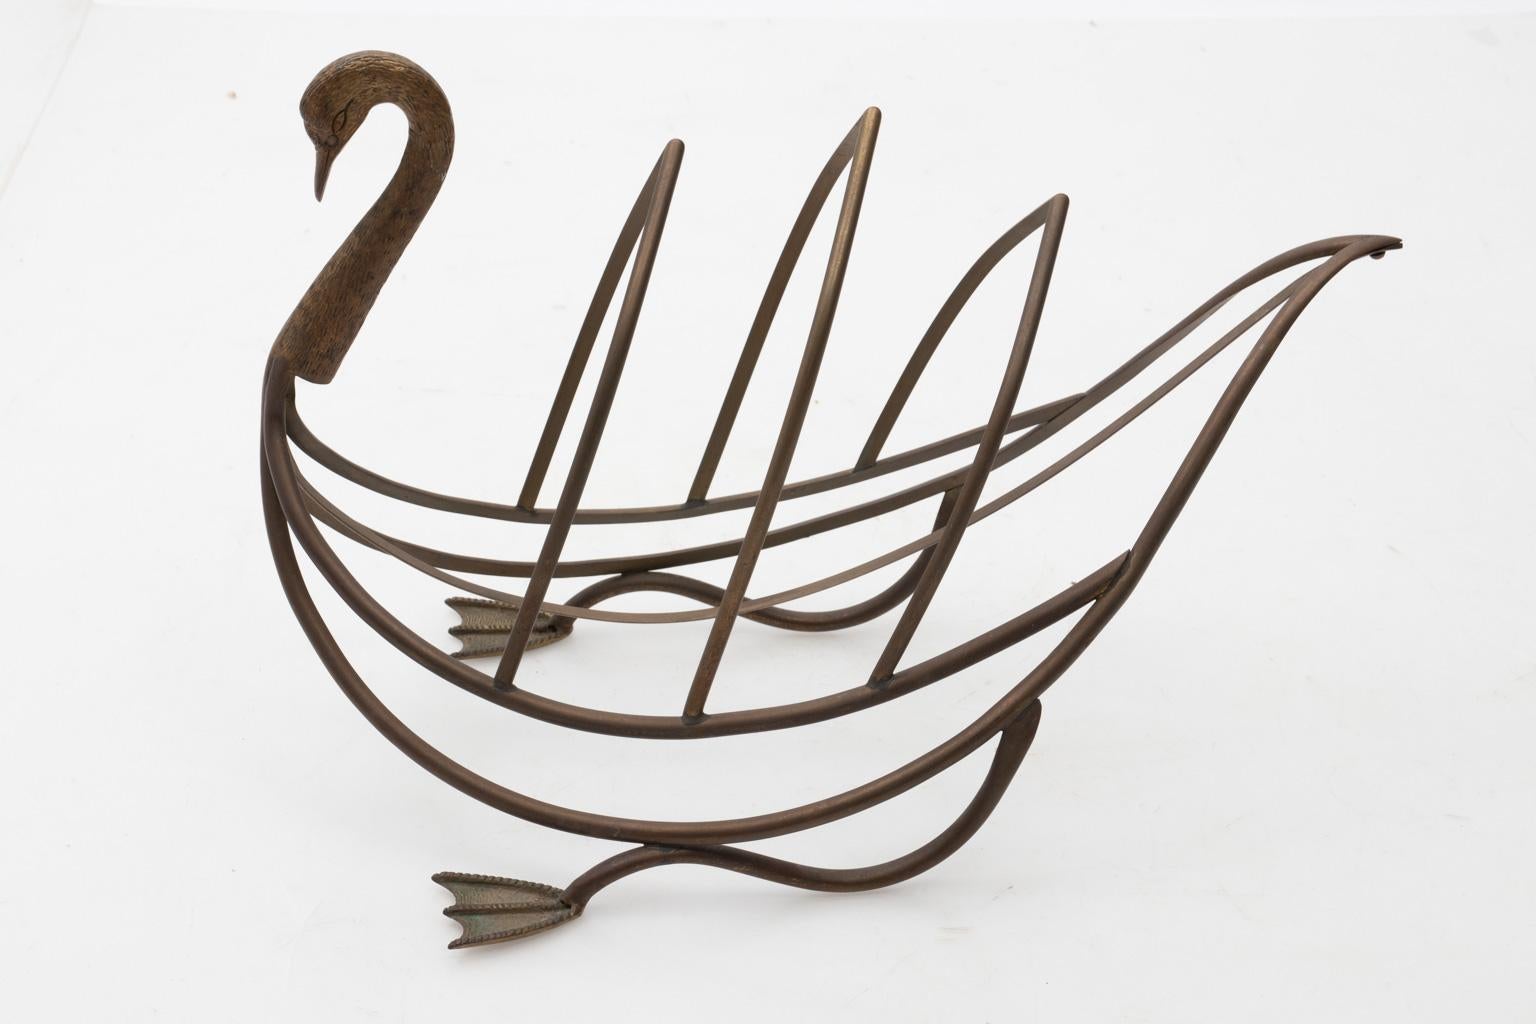 Maison Jansen brass magazine rack in the shape of a bird with original patina, circa 1960s. Please note of wear consistent with age including oxidation. Made in France.